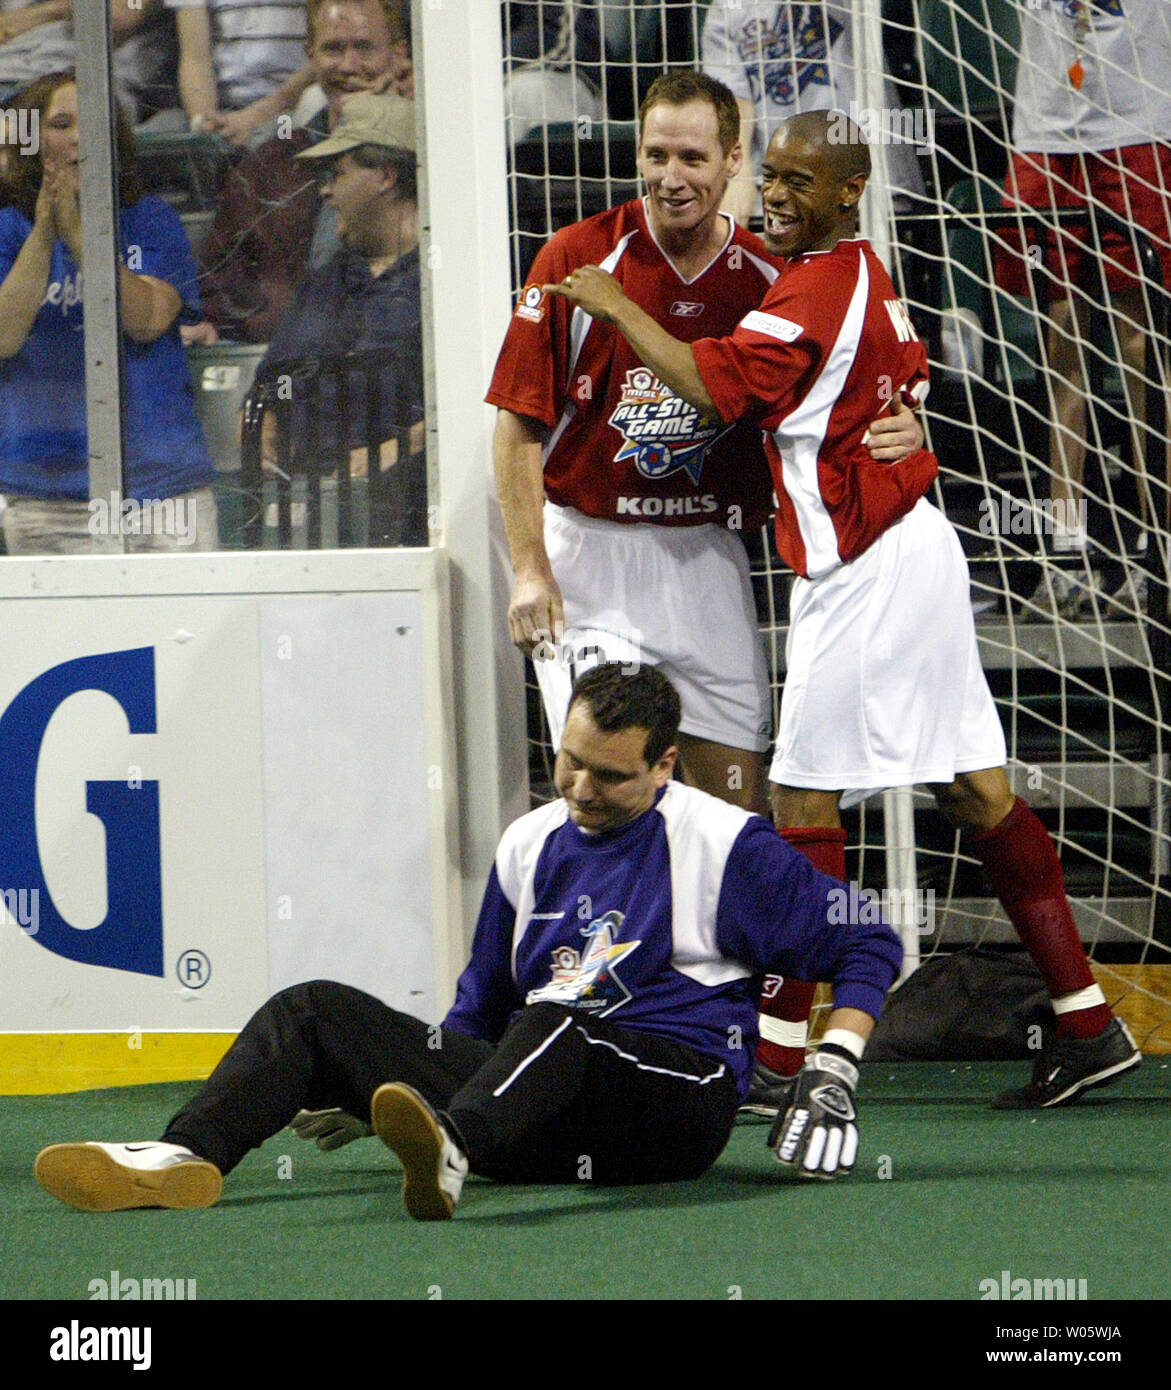 USA Team members Paul Wright of the San Diego Sockers (R) celebrates his unassisted goal with teammember Mikchael King of the Milwaukee Wave past the unhappy International Team goalkeeper Peter Pappas of the Philadelphia KiXX in the third quarter of the Major Indoor Soccer League's 2004 All Star Game at the Family Arena in St. Charles, MO on February 29, 2004. Team USA won the game 10-1. (UPI Photo/Bill Greenblatt) Stock Photo